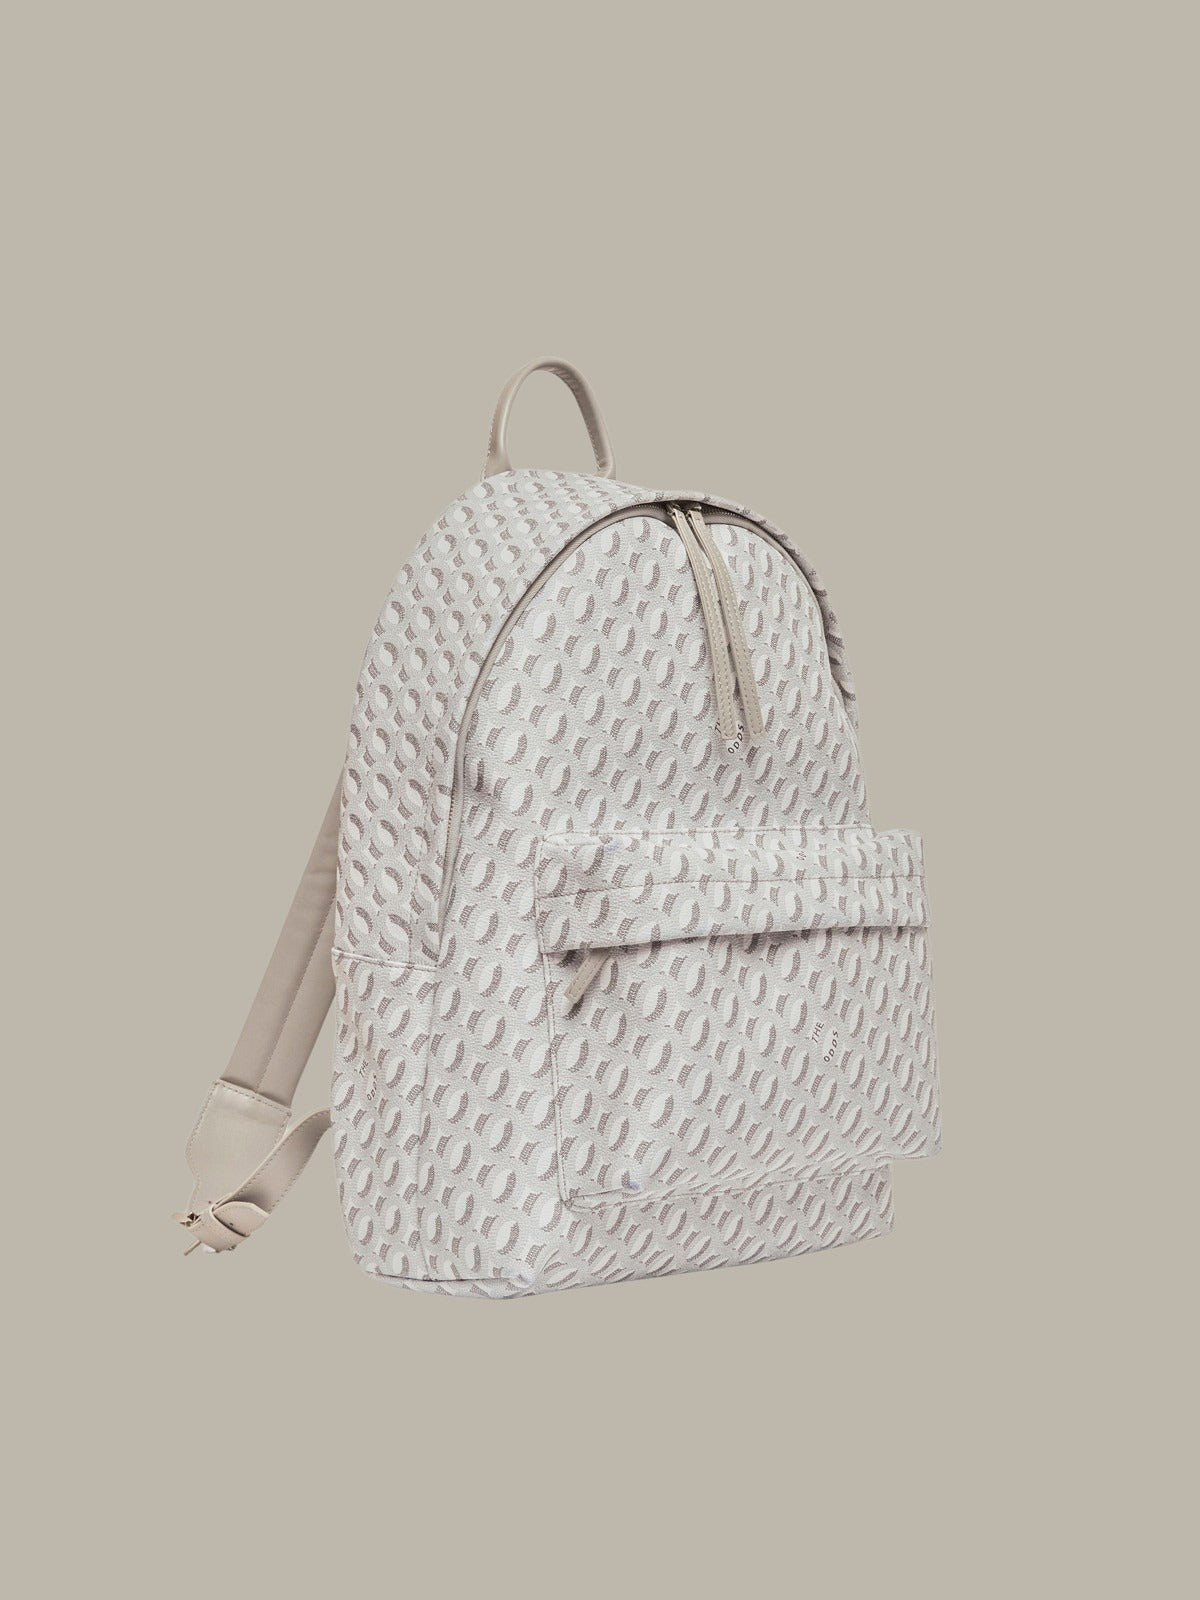 Pack The Odds Backpack Marble White-Grey/ LMTD edition